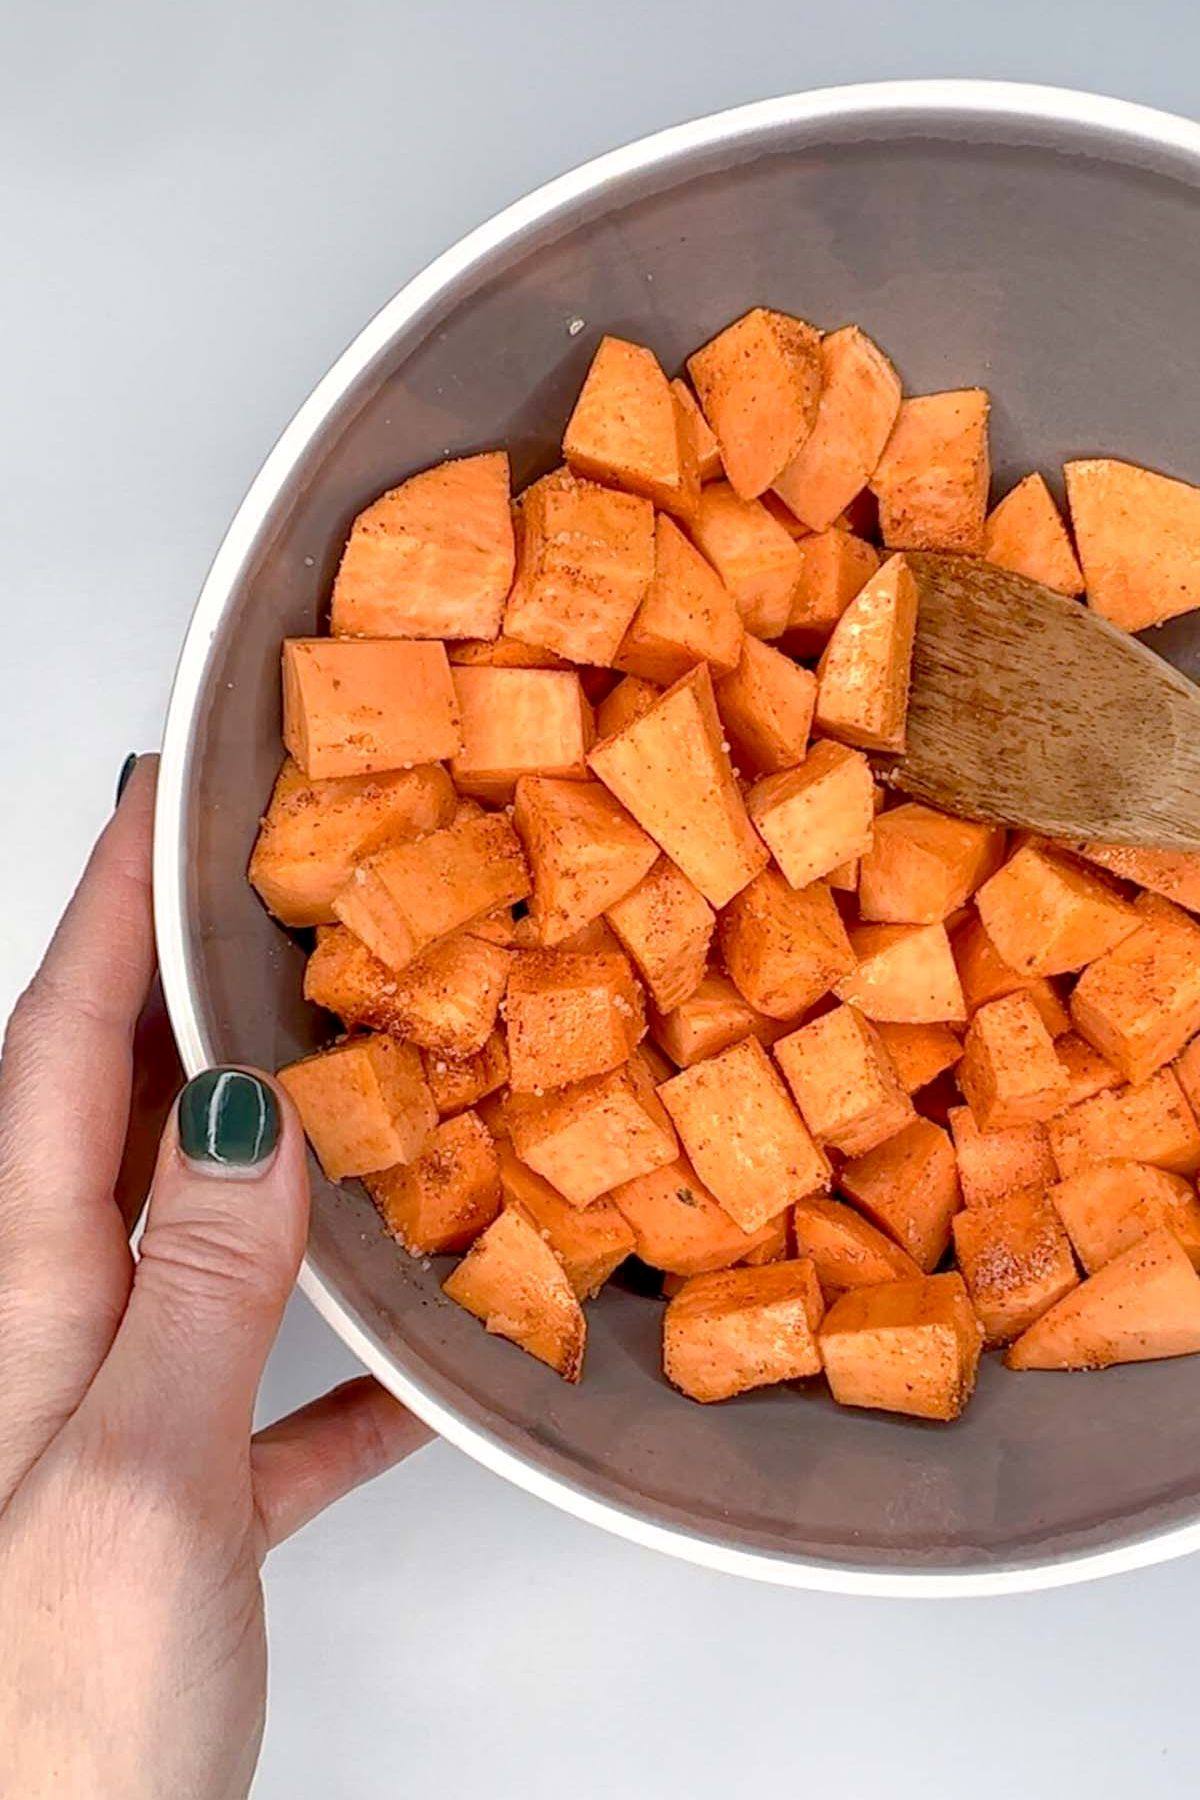 Sweet potato cubes mixed with seasoning in a gray mixing bowl.